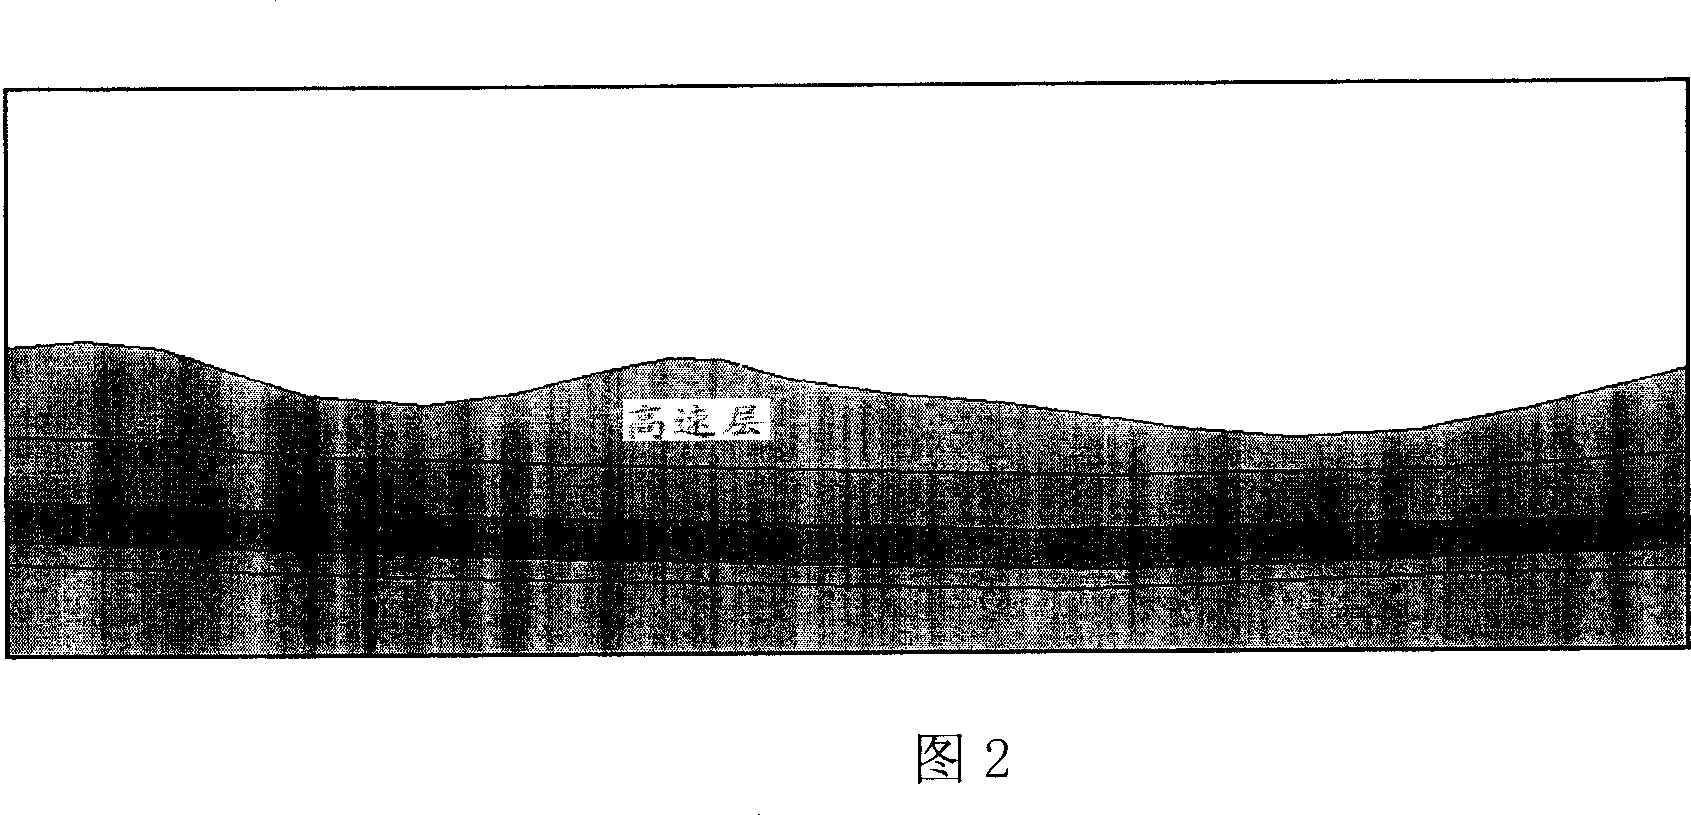 Method of approximating layer displacing static correct